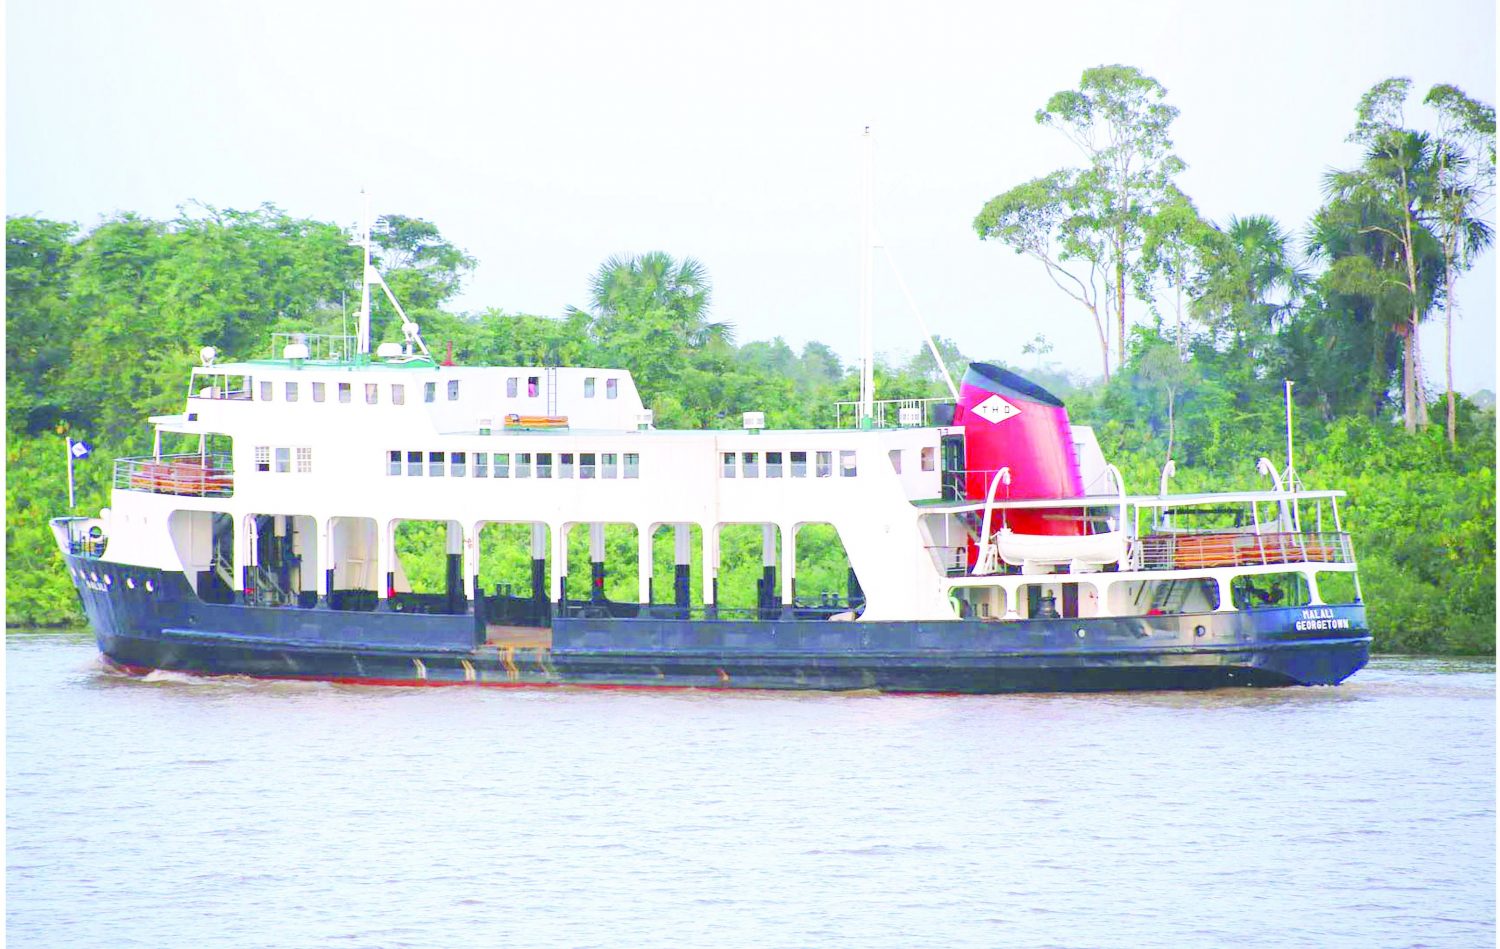 The M.V. Malali that once reigned on the Essequibo (Photo by Joanna Dhanraj)